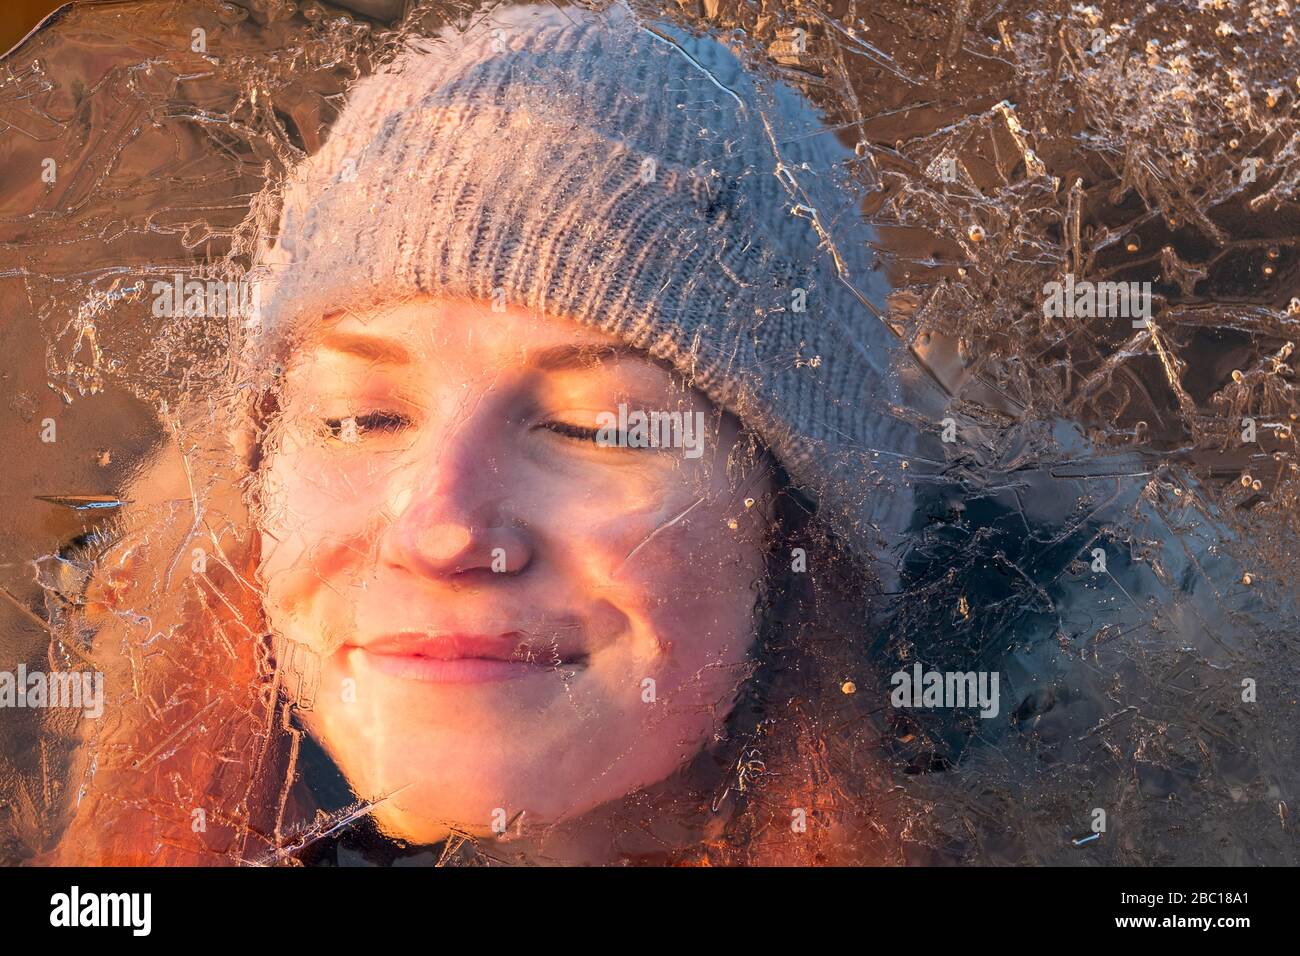 Portrait of smiling teenage girl behind ice-covered surface Stock Photo